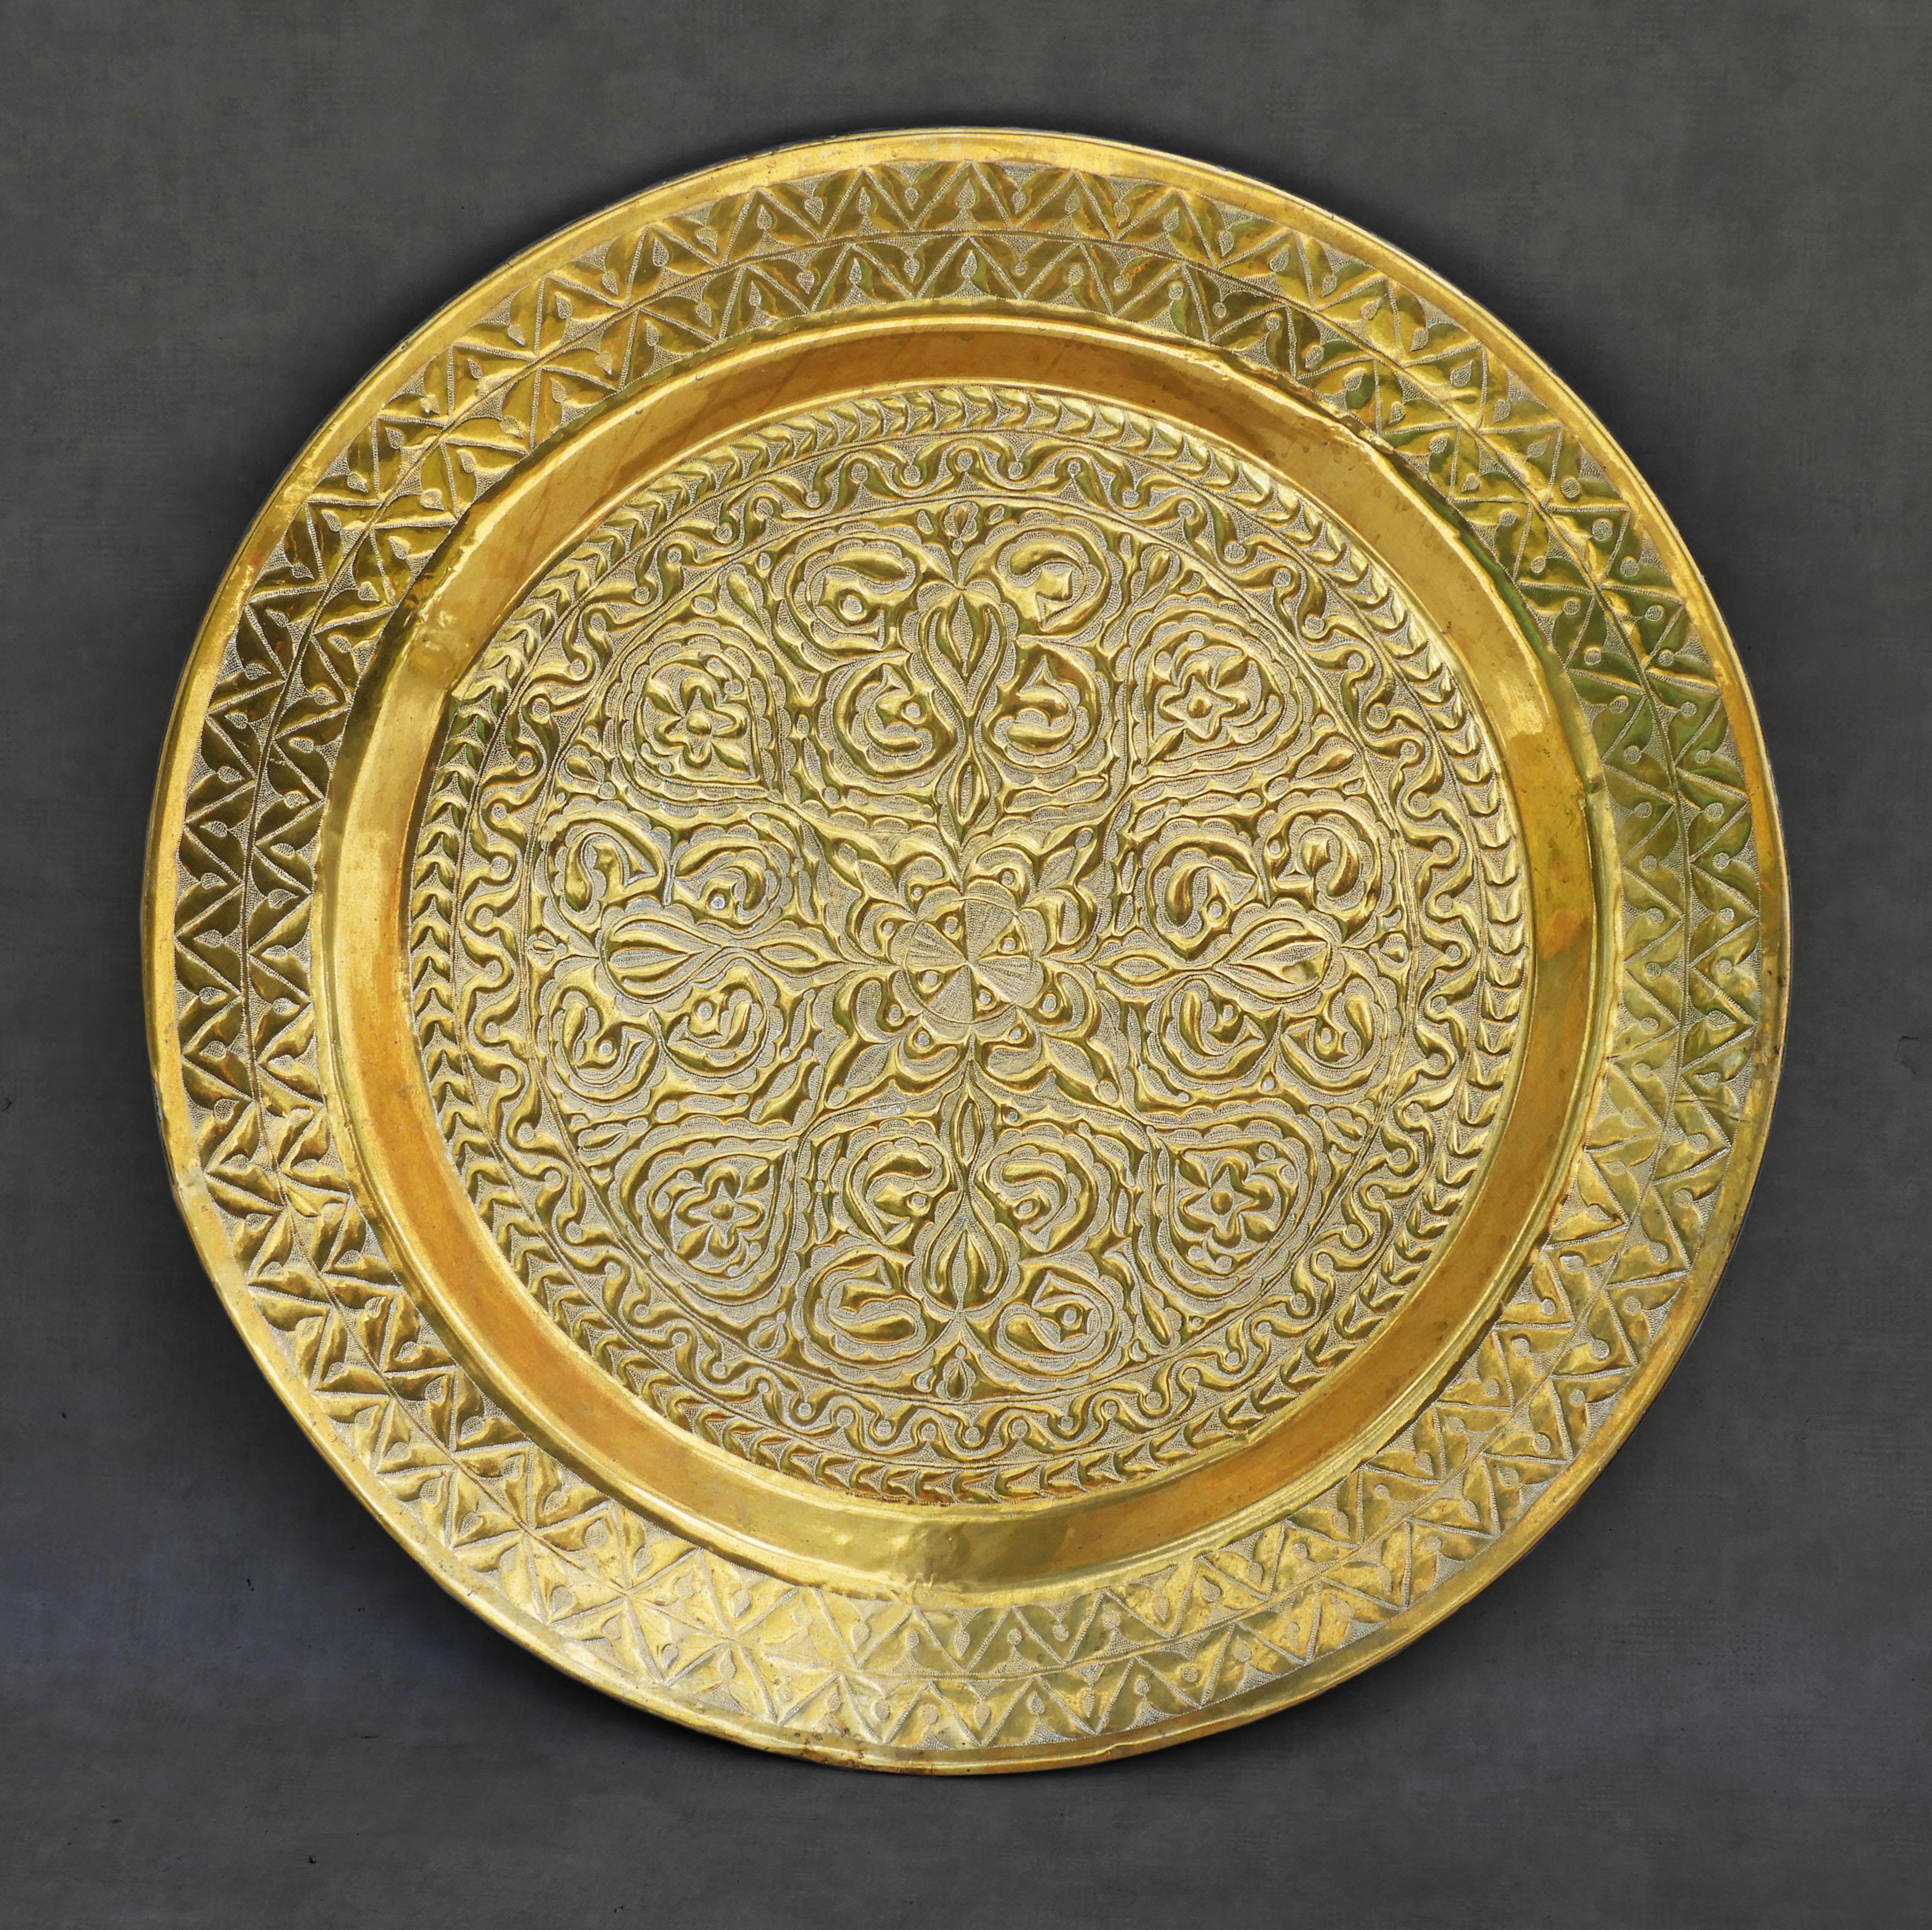 Monumental oriental brass charger, c1960.

Unusual oversized decorative wall plate, beautifully handcrafted in brass and gorgeously embossed in a free-flowing symmetrical design. 

In good vintage condition with nice patina, some minor denting – not